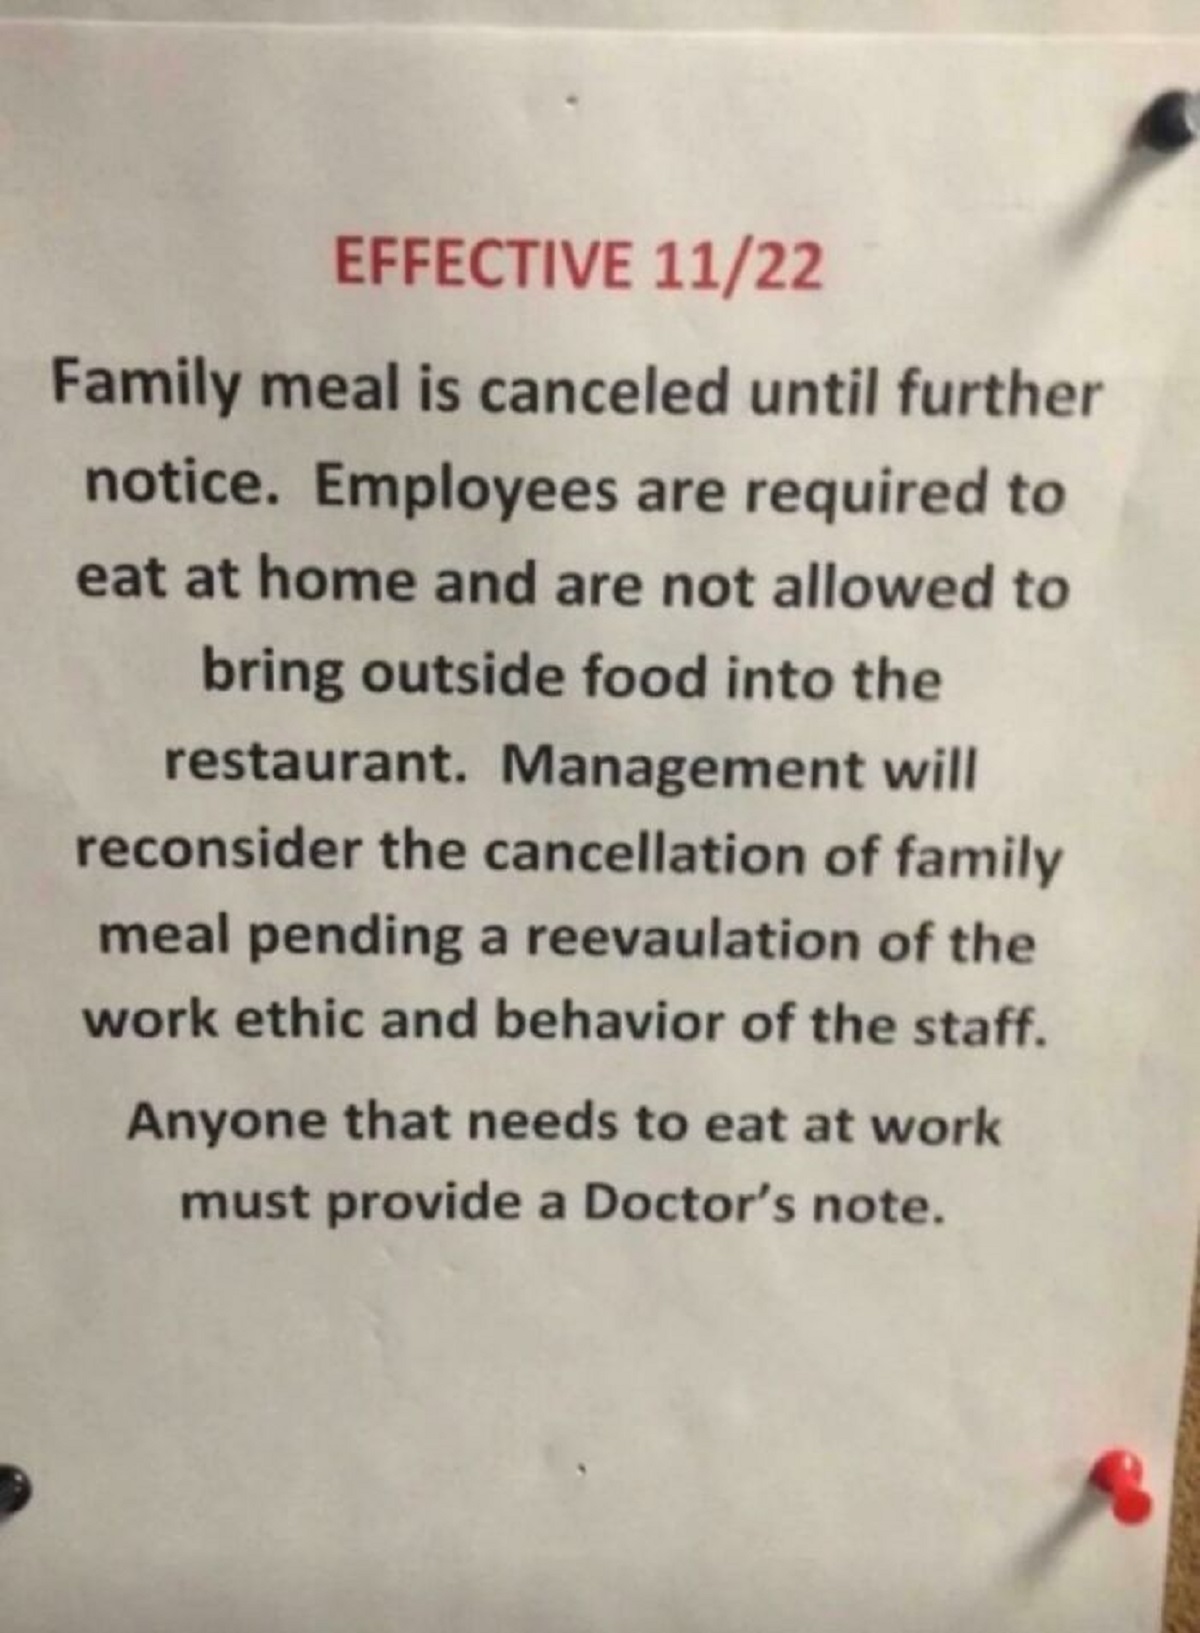 document - Effective 1122 Family meal is canceled until further notice. Employees are required to eat at home and are not allowed to bring outside food into the restaurant. Management will reconsider the cancellation of family meal pending a reevaulation 